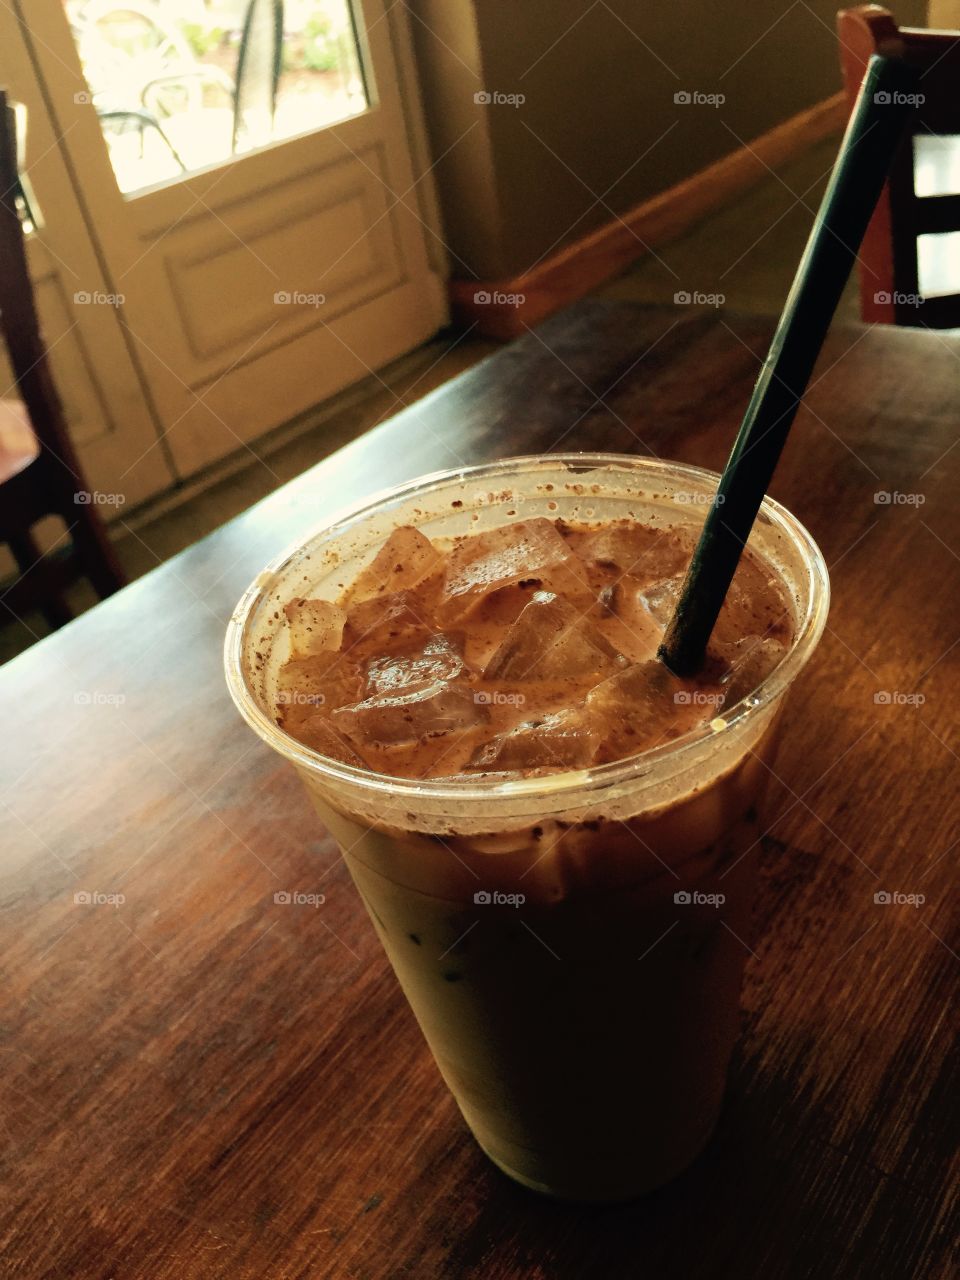 Iced coffee . Cold coffee on a hot day